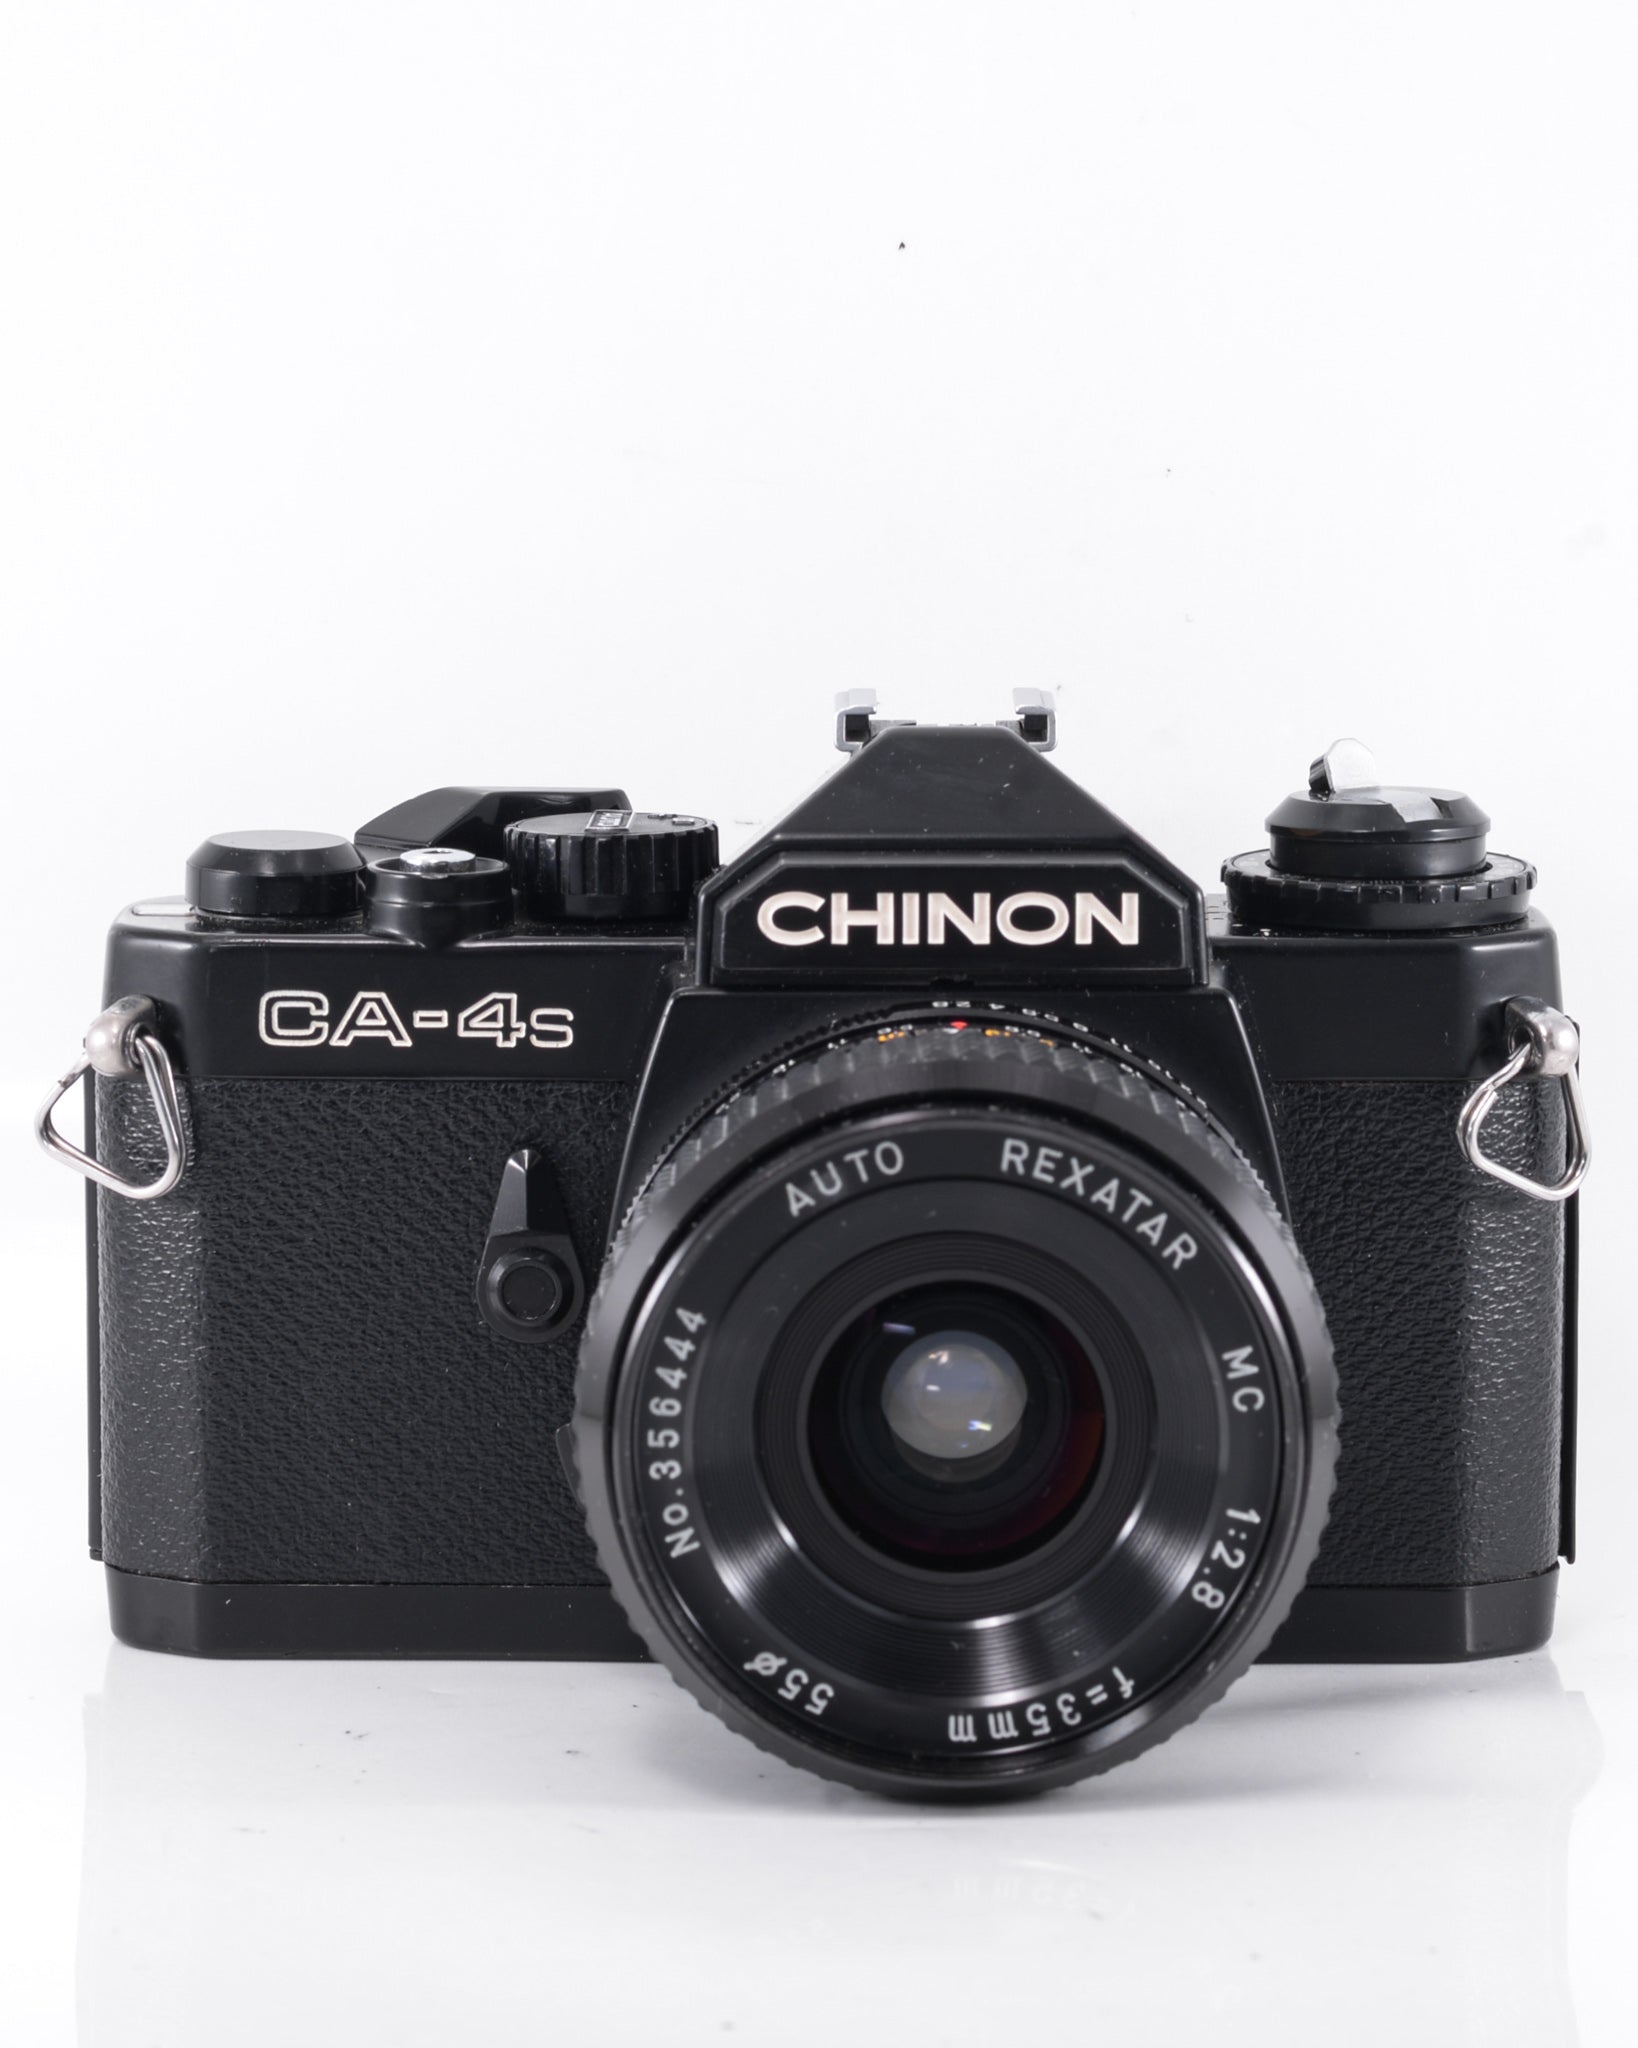 Chinon CA-4s 35mm SLR film camera with 35mm f2.8 lens